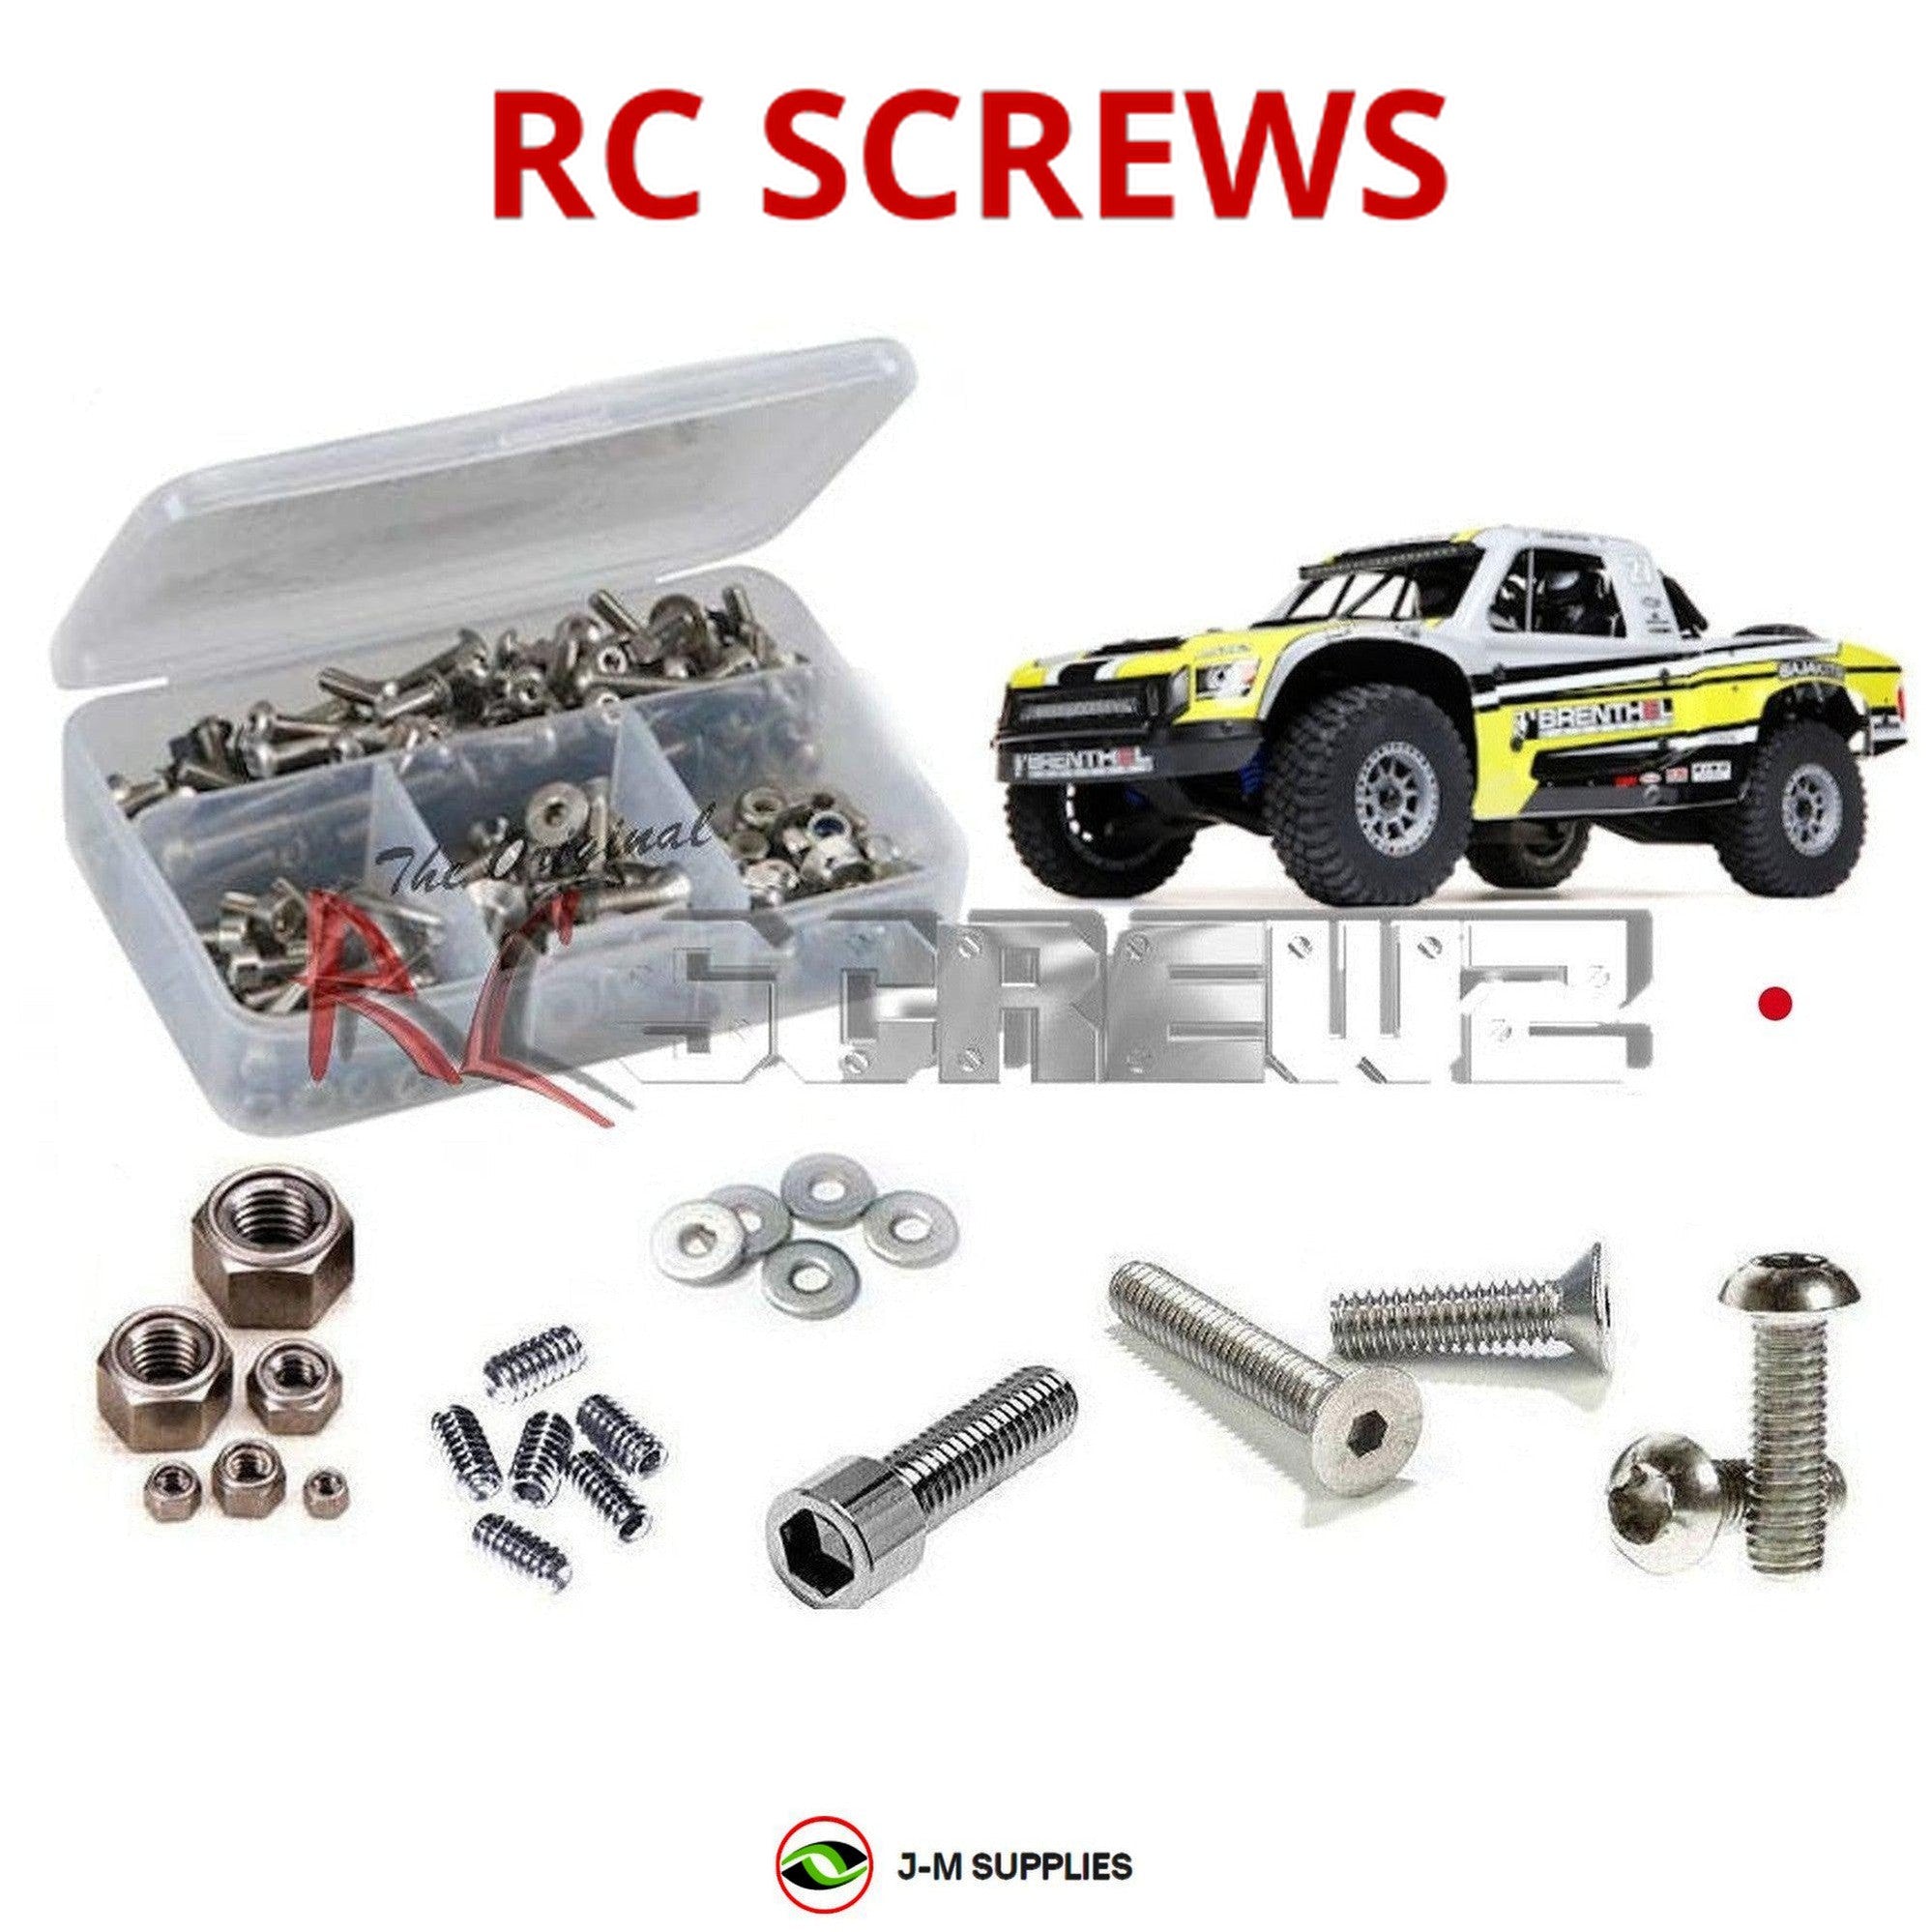 RCScrewZ Stainless Screw Kit los123 for Losi Super Baja Rey 2.0 1/6 Truck | PRO - Picture 1 of 12